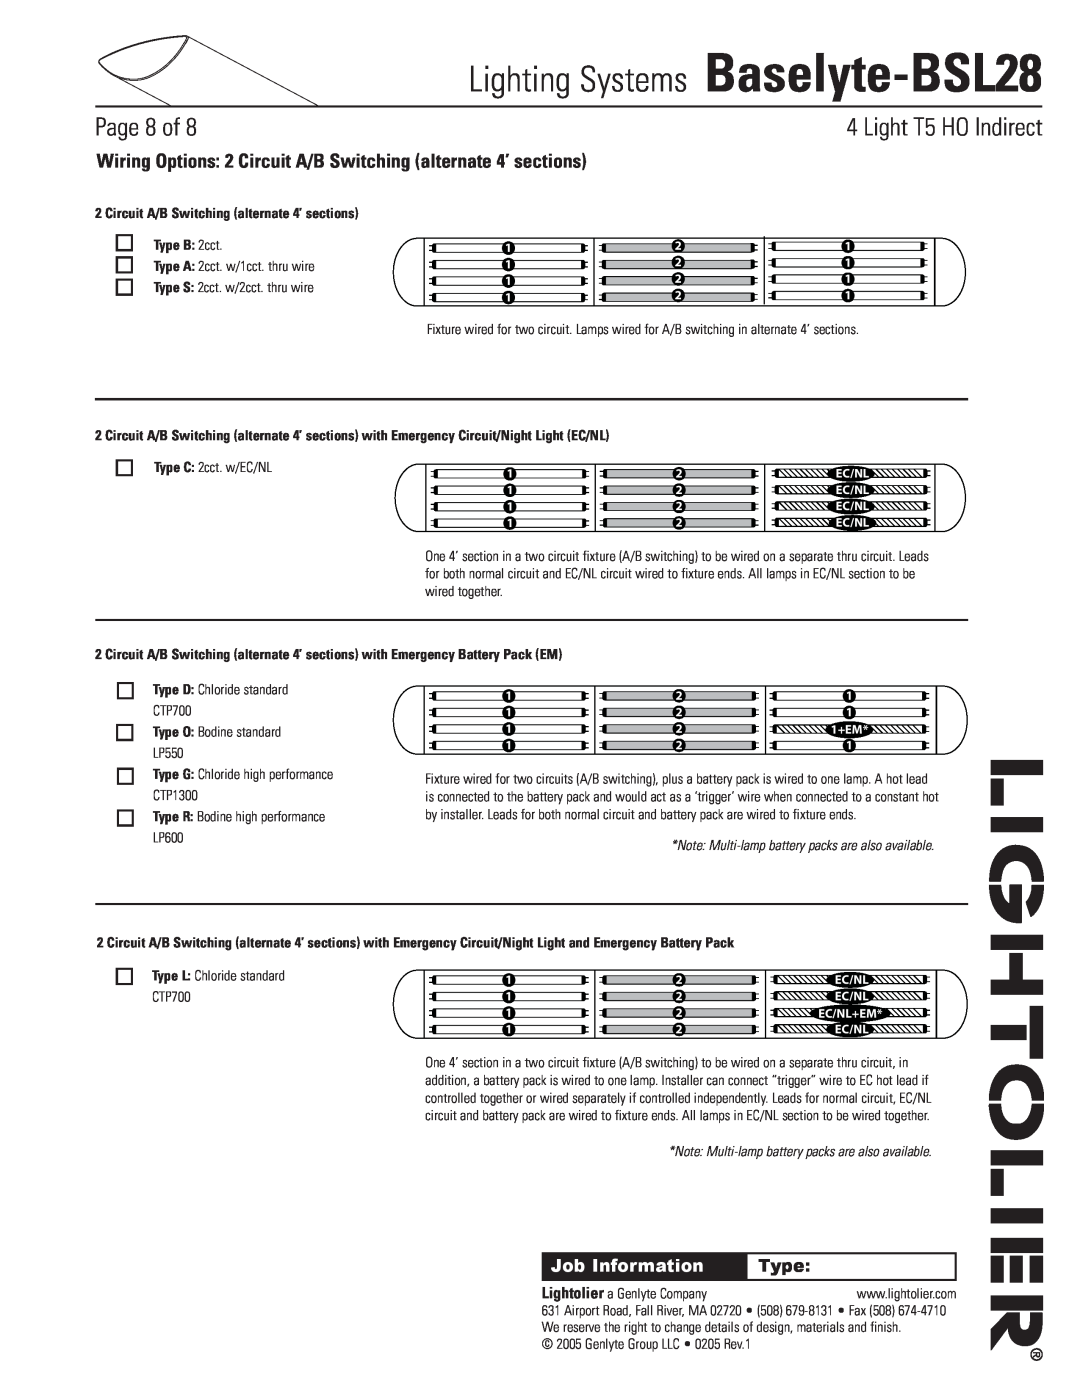 Lightolier Baselyte-BSL28 Circuit A/B Switching alternate 4’ sections, Type B 2cct, Type O Bodine standard LP550, Page of 